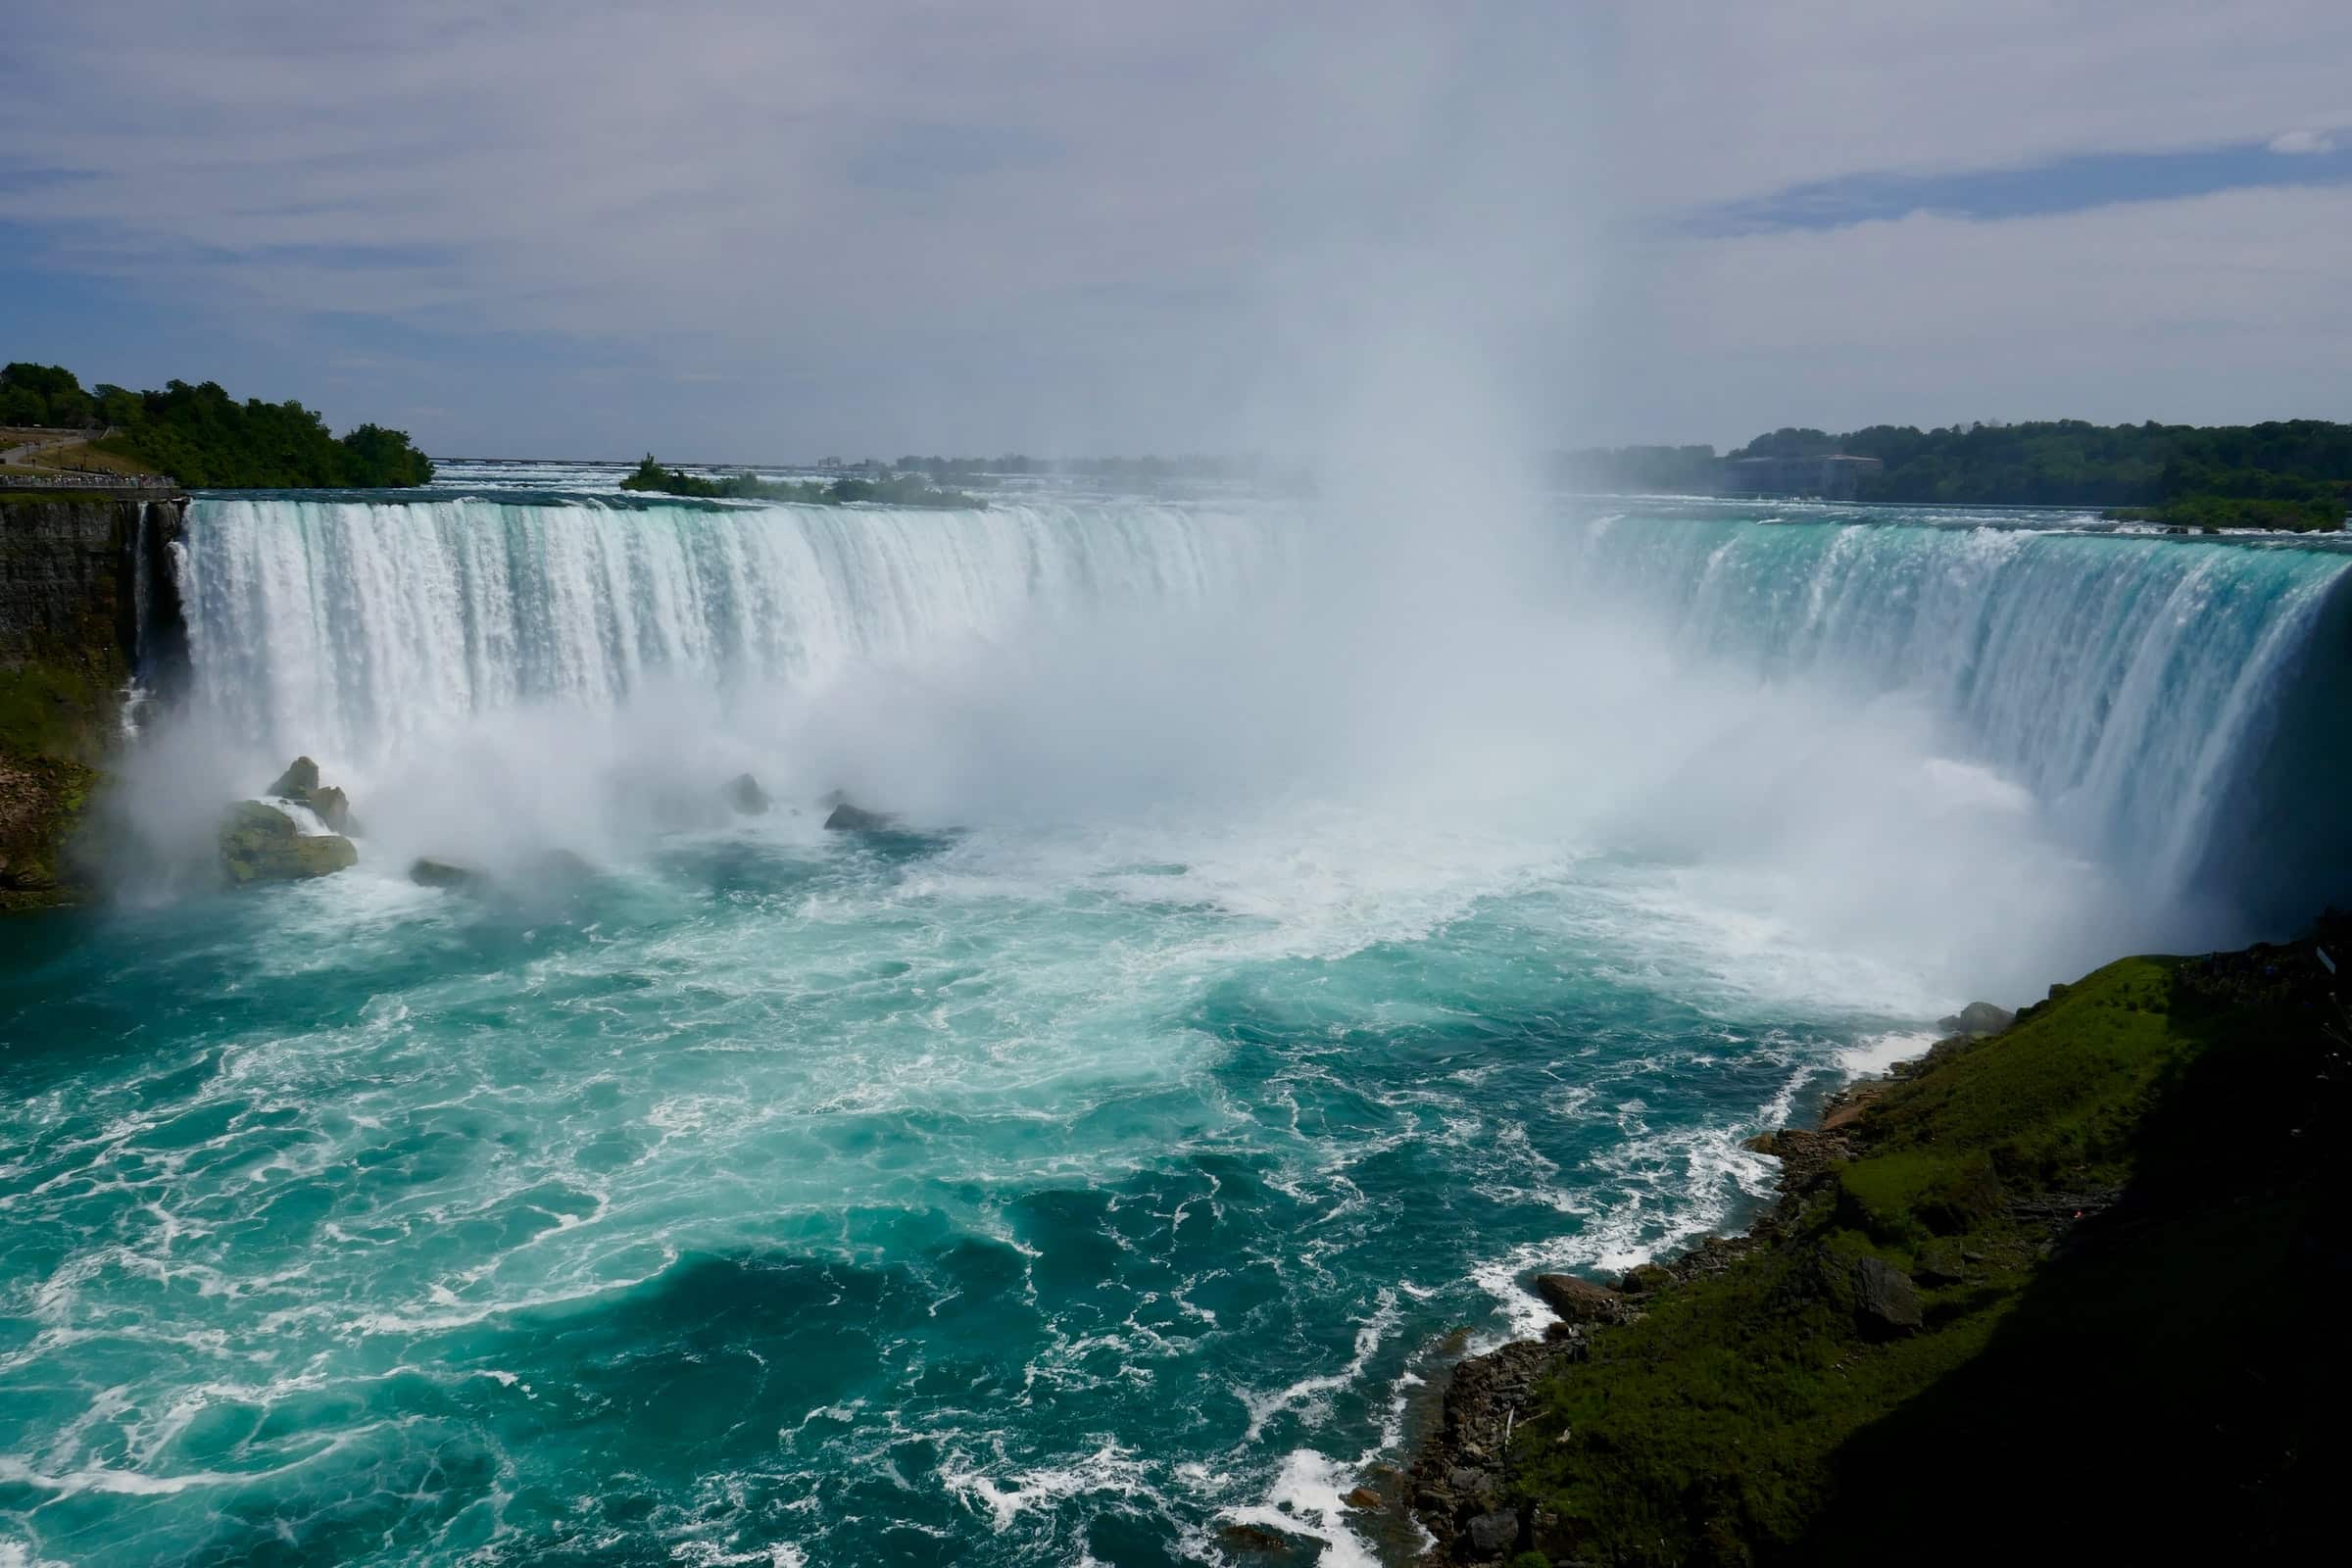 The Best Areas to Stay in Niagara Falls, Canadian Side